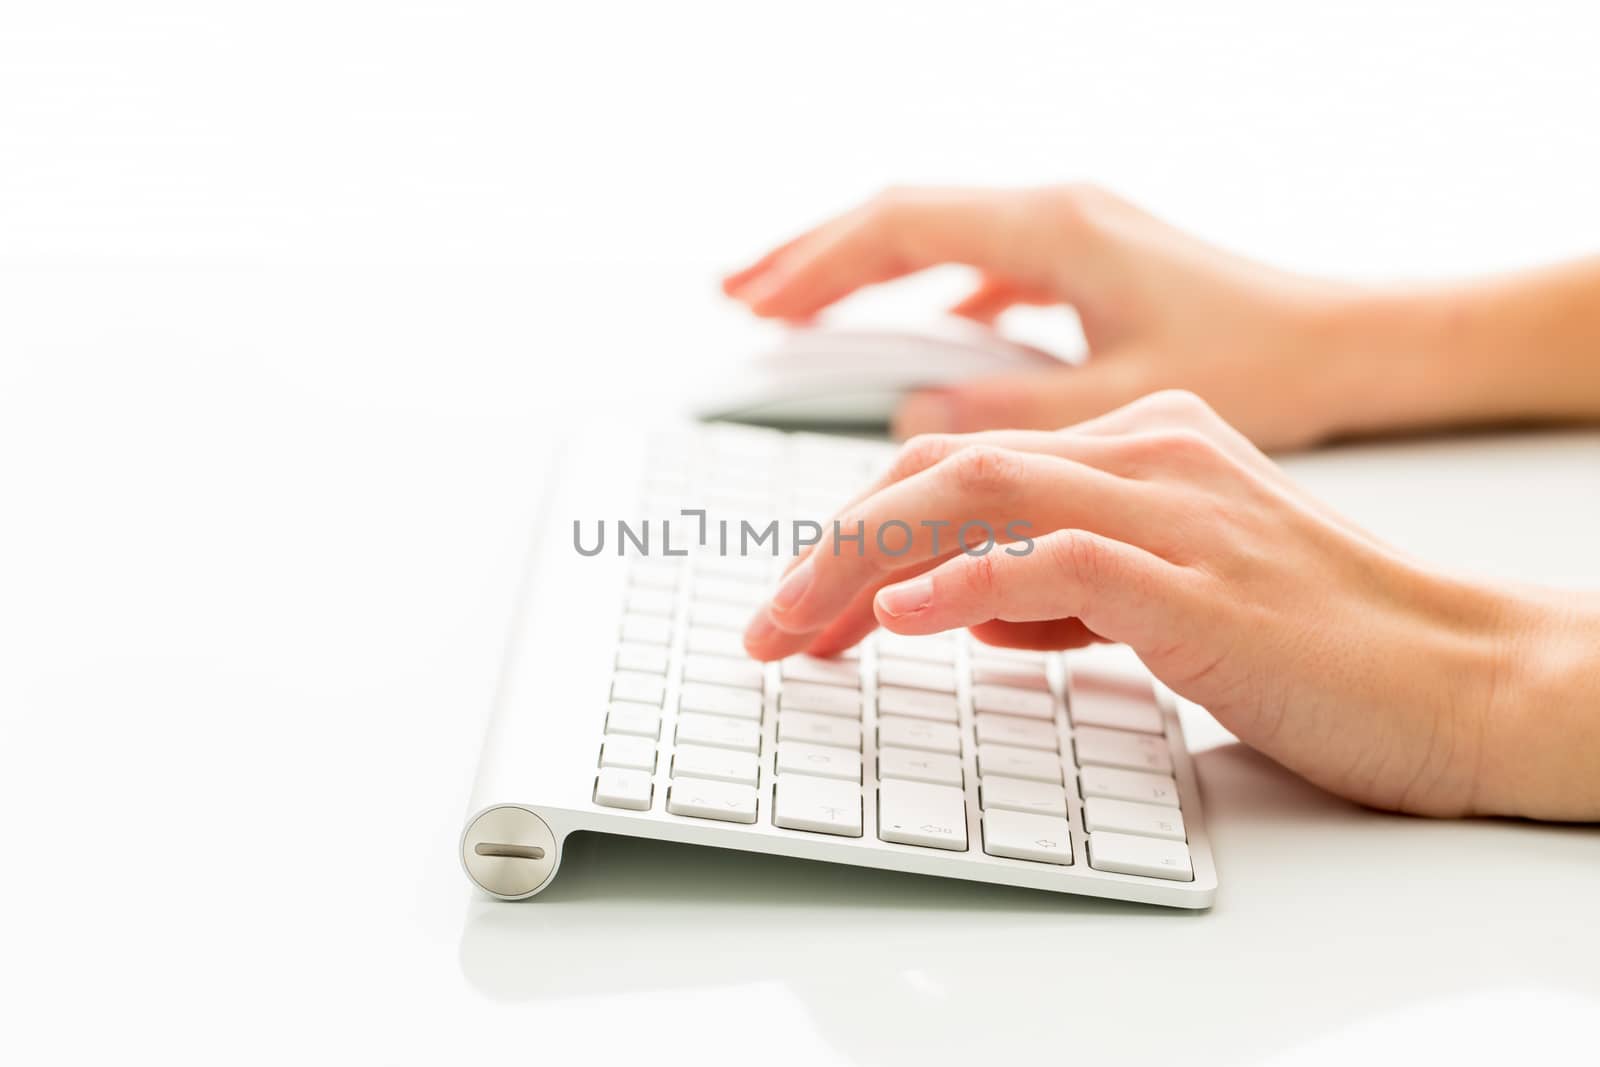 Hands of a person working an a keyboard over white background by viktor_cap